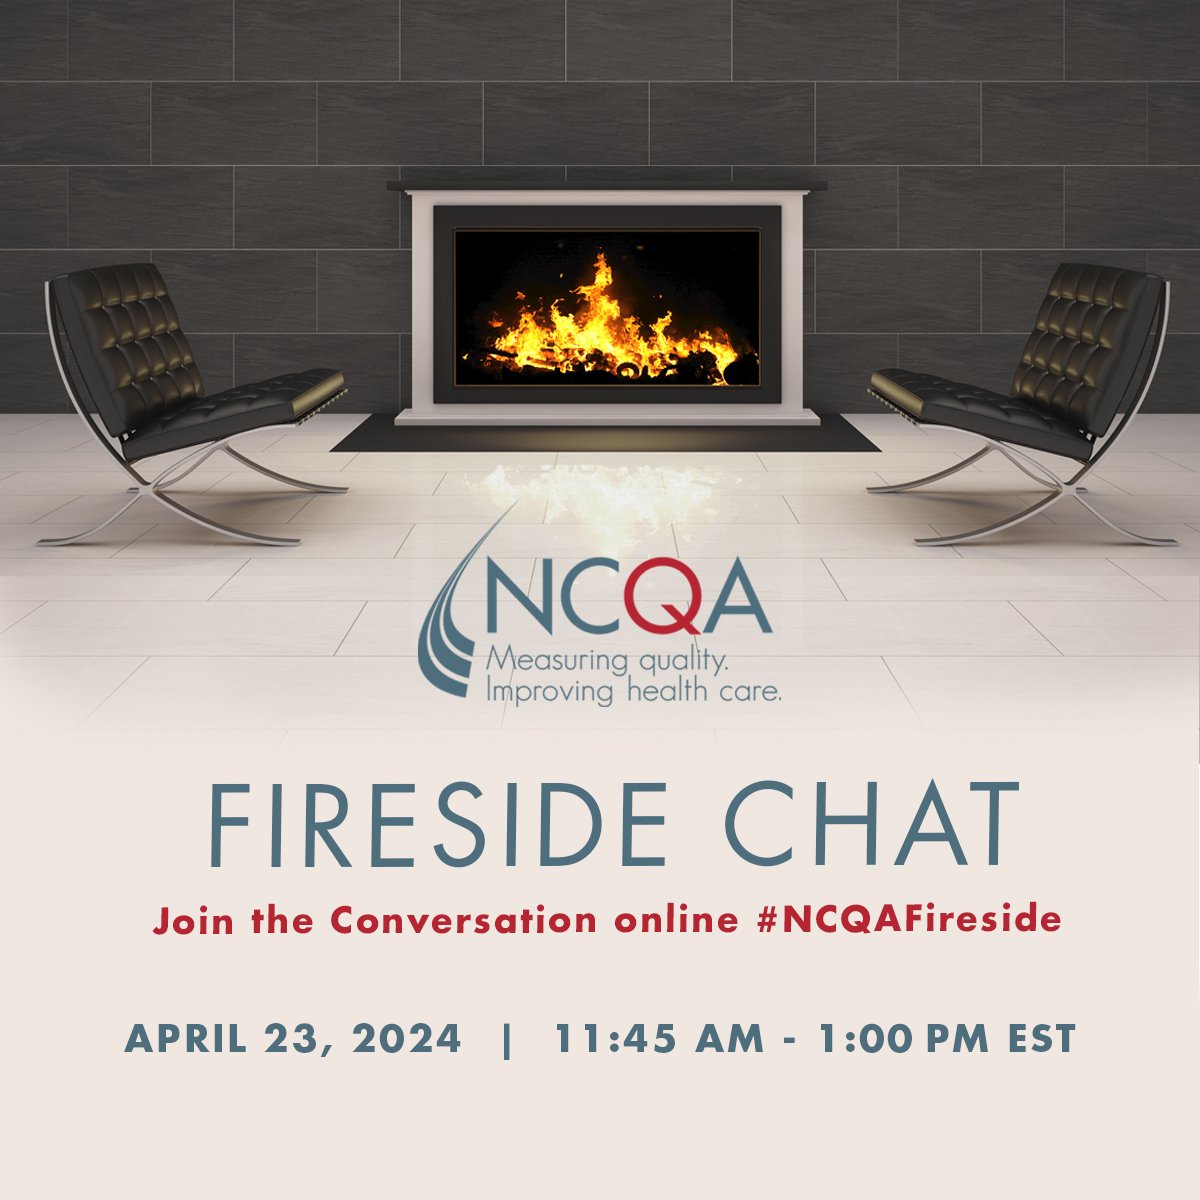 Join #NCQA for our next Fireside Chat series as Dr. Douglas Fish chats with NCQA’s @EricSchneiderMD to discuss New York’s role in addressing disparities and @CMSGov’s recent approval of New York’s 1115 waiver amendment. Register here: bit.ly/43WS5Jx